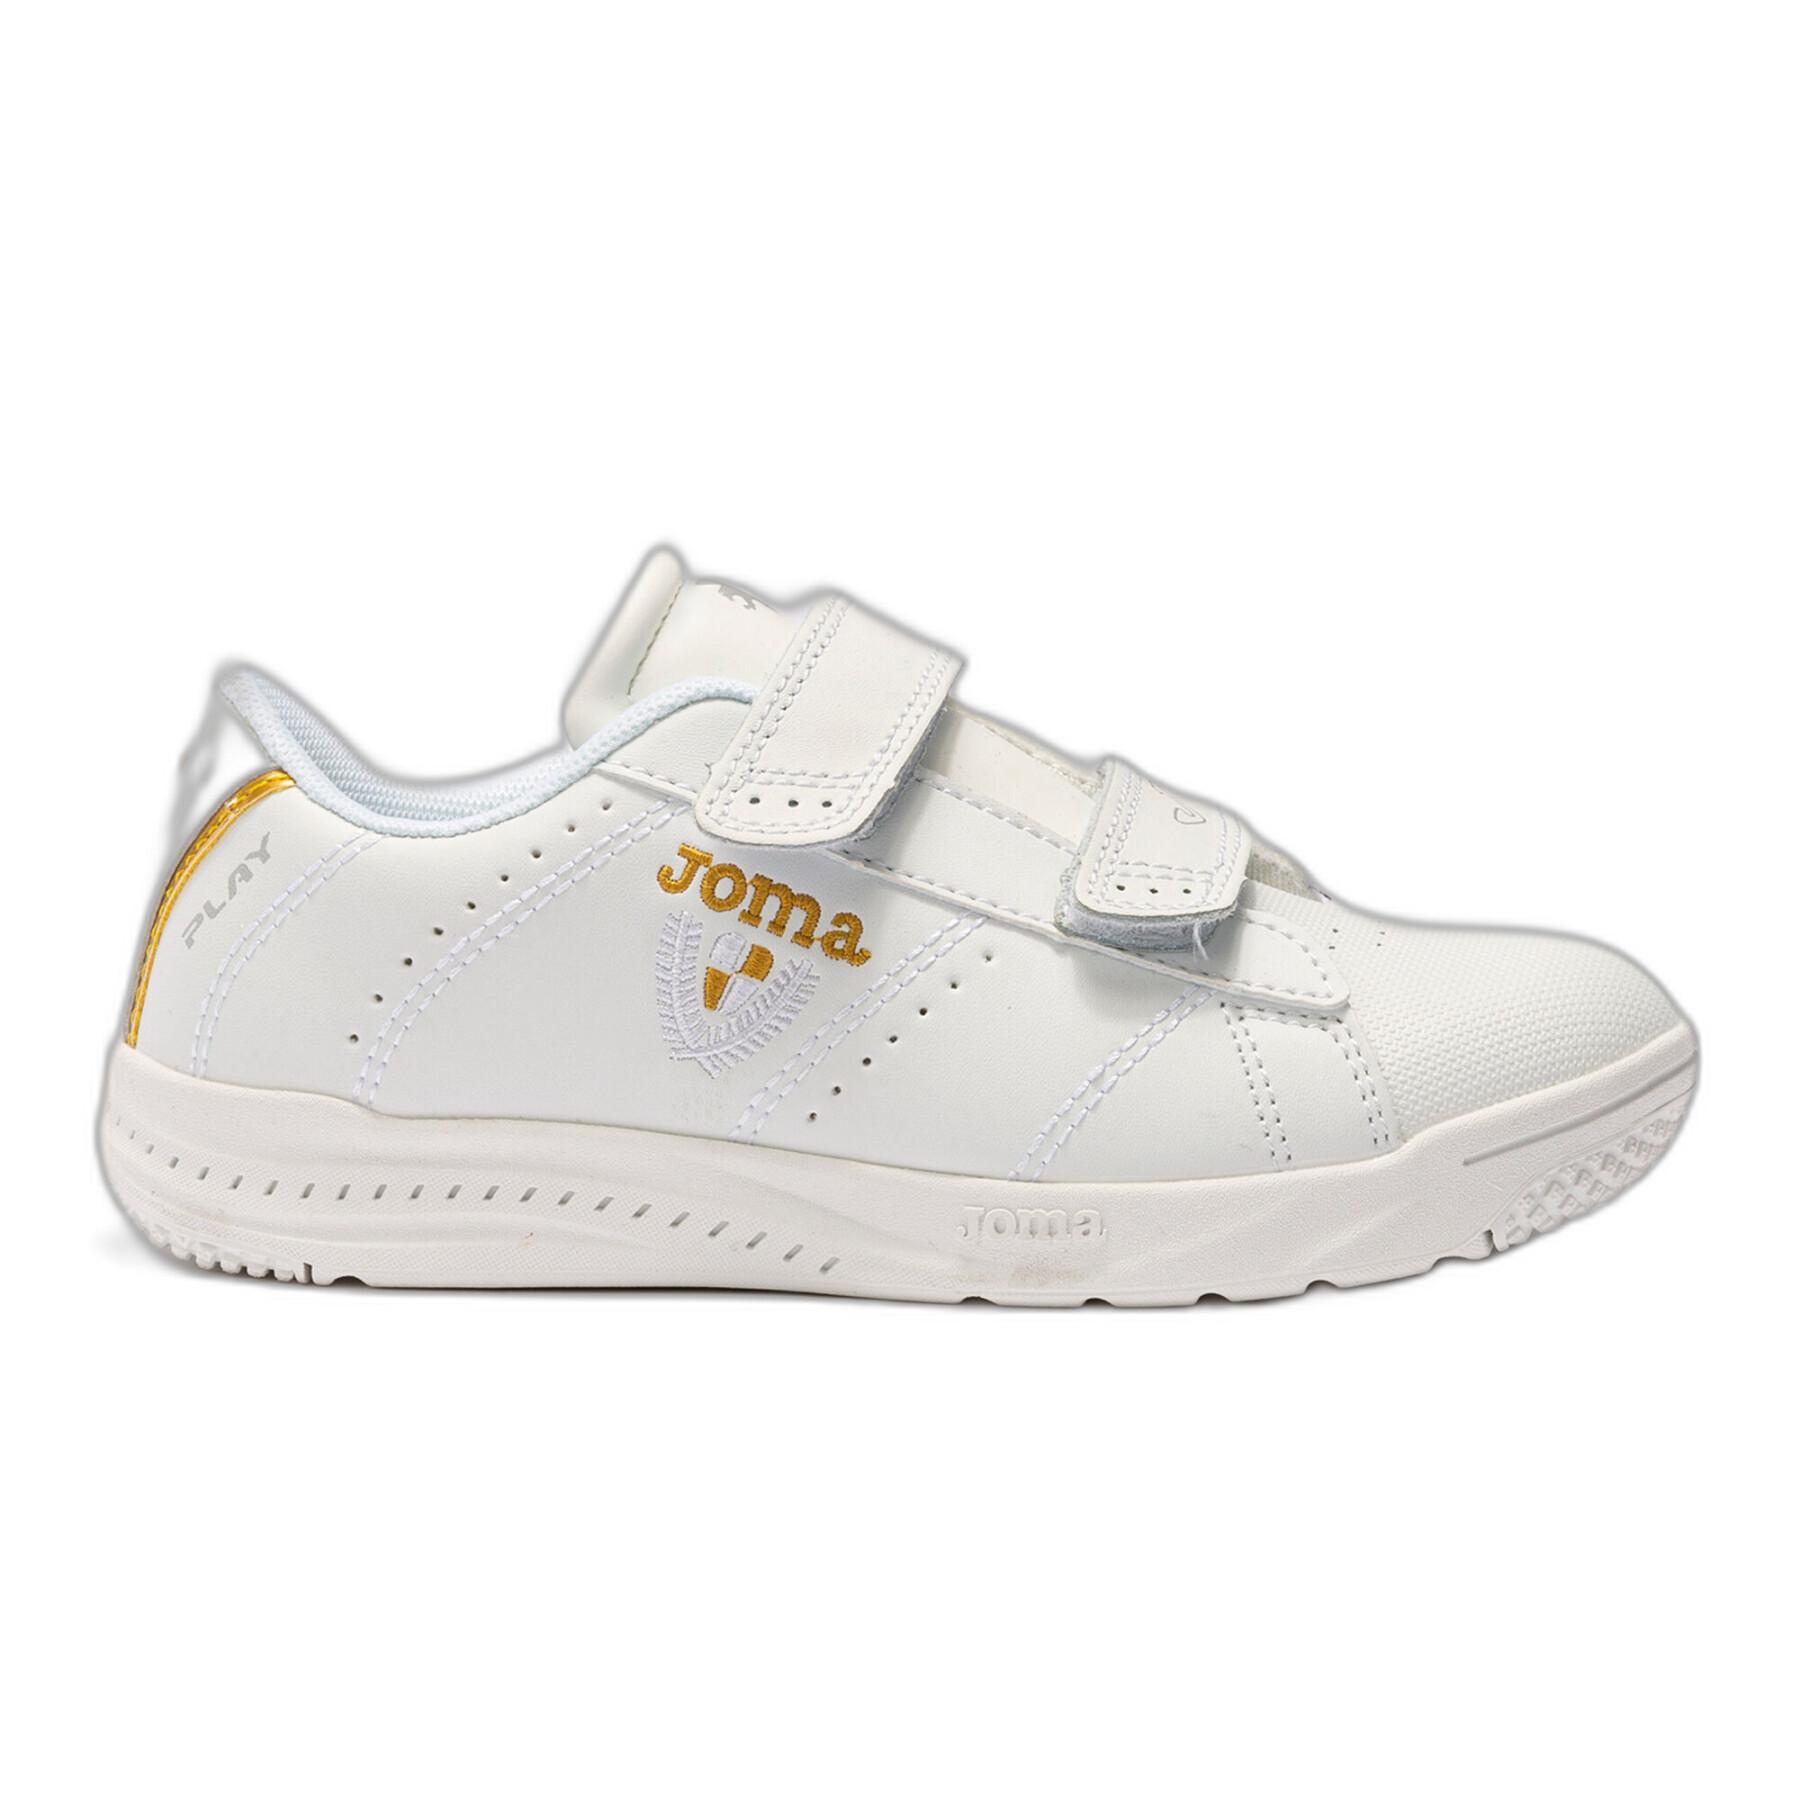 Formadores Joma Play 2218